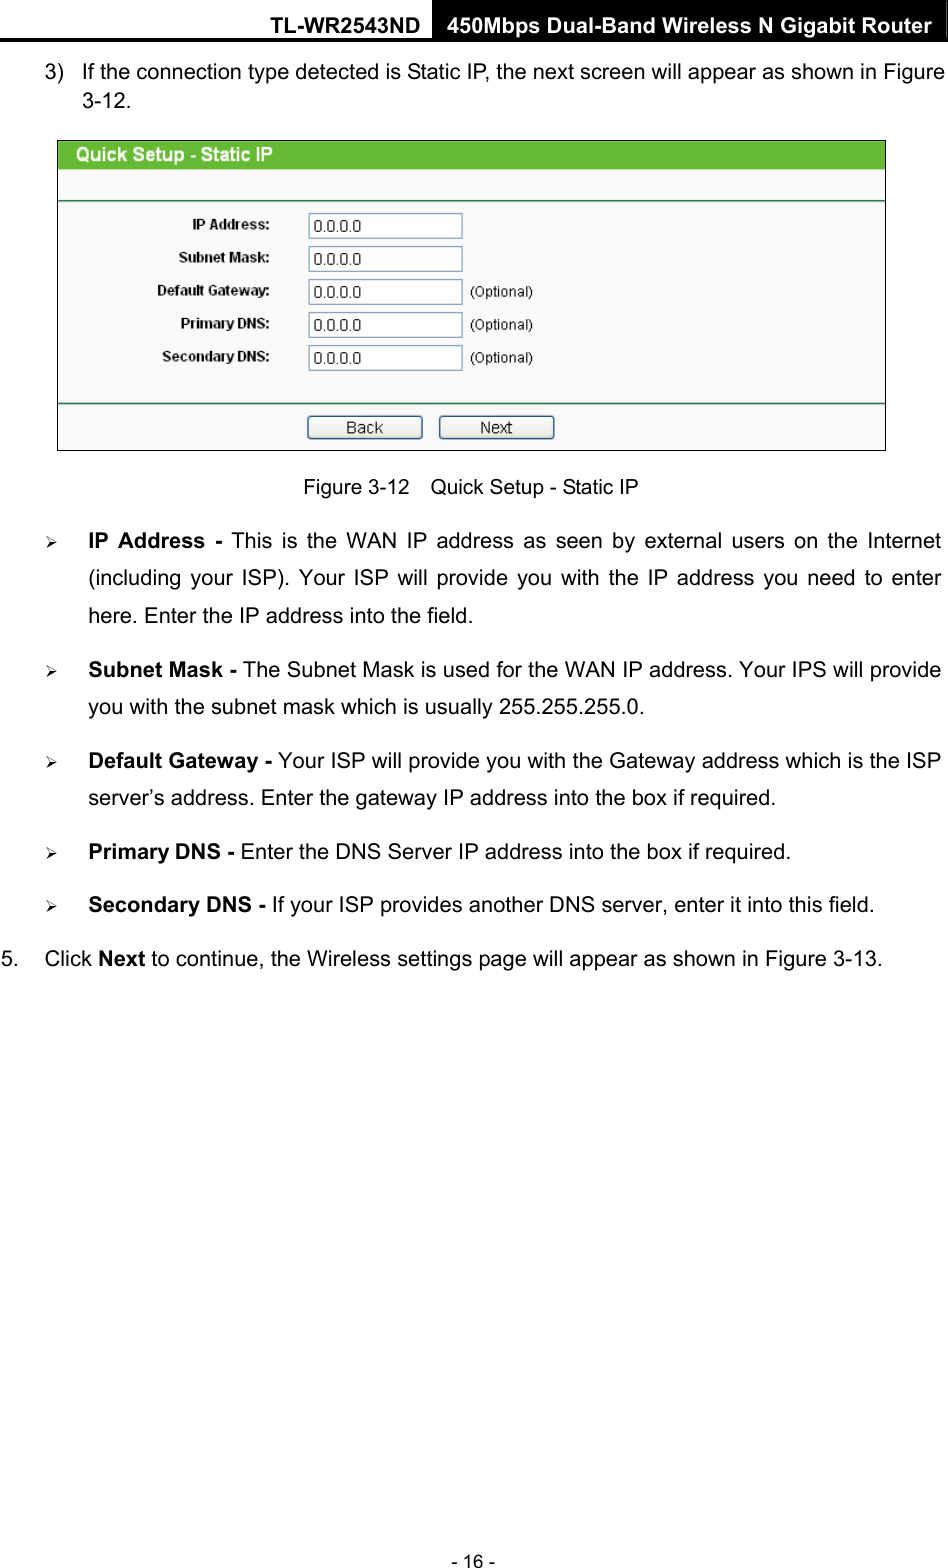 TL-WR2543ND 450Mbps Dual-Band Wireless N Gigabit Router - 16 - 3)  If the connection type detected is Static IP, the next screen will appear as shown in Figure 3-12.   Figure 3-12    Quick Setup - Static IP ¾ IP Address - This is the WAN IP address as seen by external users on the Internet (including your ISP). Your ISP will provide you with the IP address you need to enter here. Enter the IP address into the field. ¾ Subnet Mask - The Subnet Mask is used for the WAN IP address. Your IPS will provide you with the subnet mask which is usually 255.255.255.0. ¾ Default Gateway - Your ISP will provide you with the Gateway address which is the ISP server’s address. Enter the gateway IP address into the box if required. ¾ Primary DNS - Enter the DNS Server IP address into the box if required.   ¾ Secondary DNS - If your ISP provides another DNS server, enter it into this field. 5. Click Next to continue, the Wireless settings page will appear as shown in Figure 3-13. 